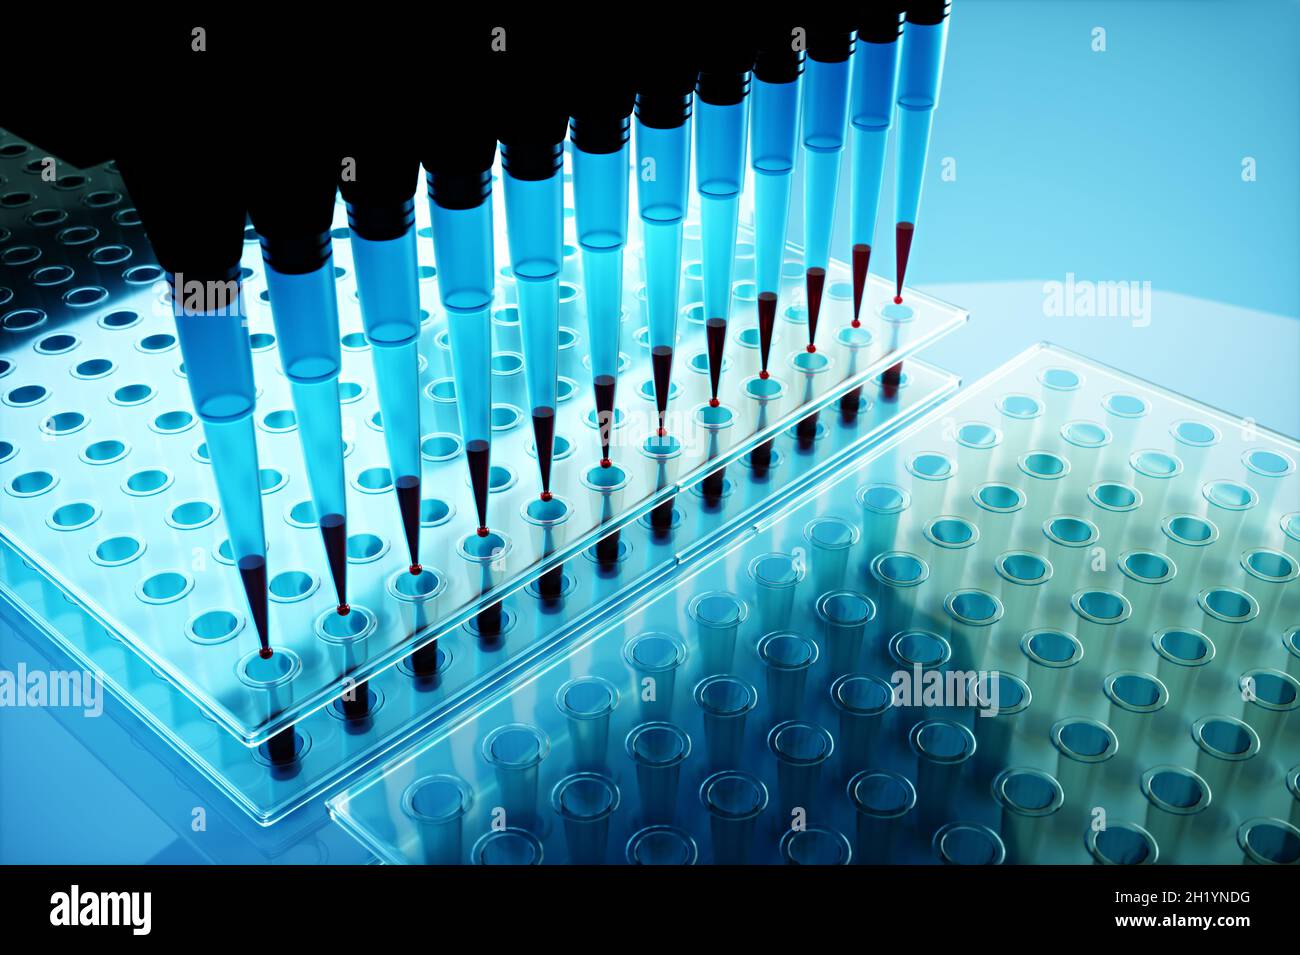 Multichannel pipette and multi well plates used in microbiology lab. 3D illustration. Stock Photo